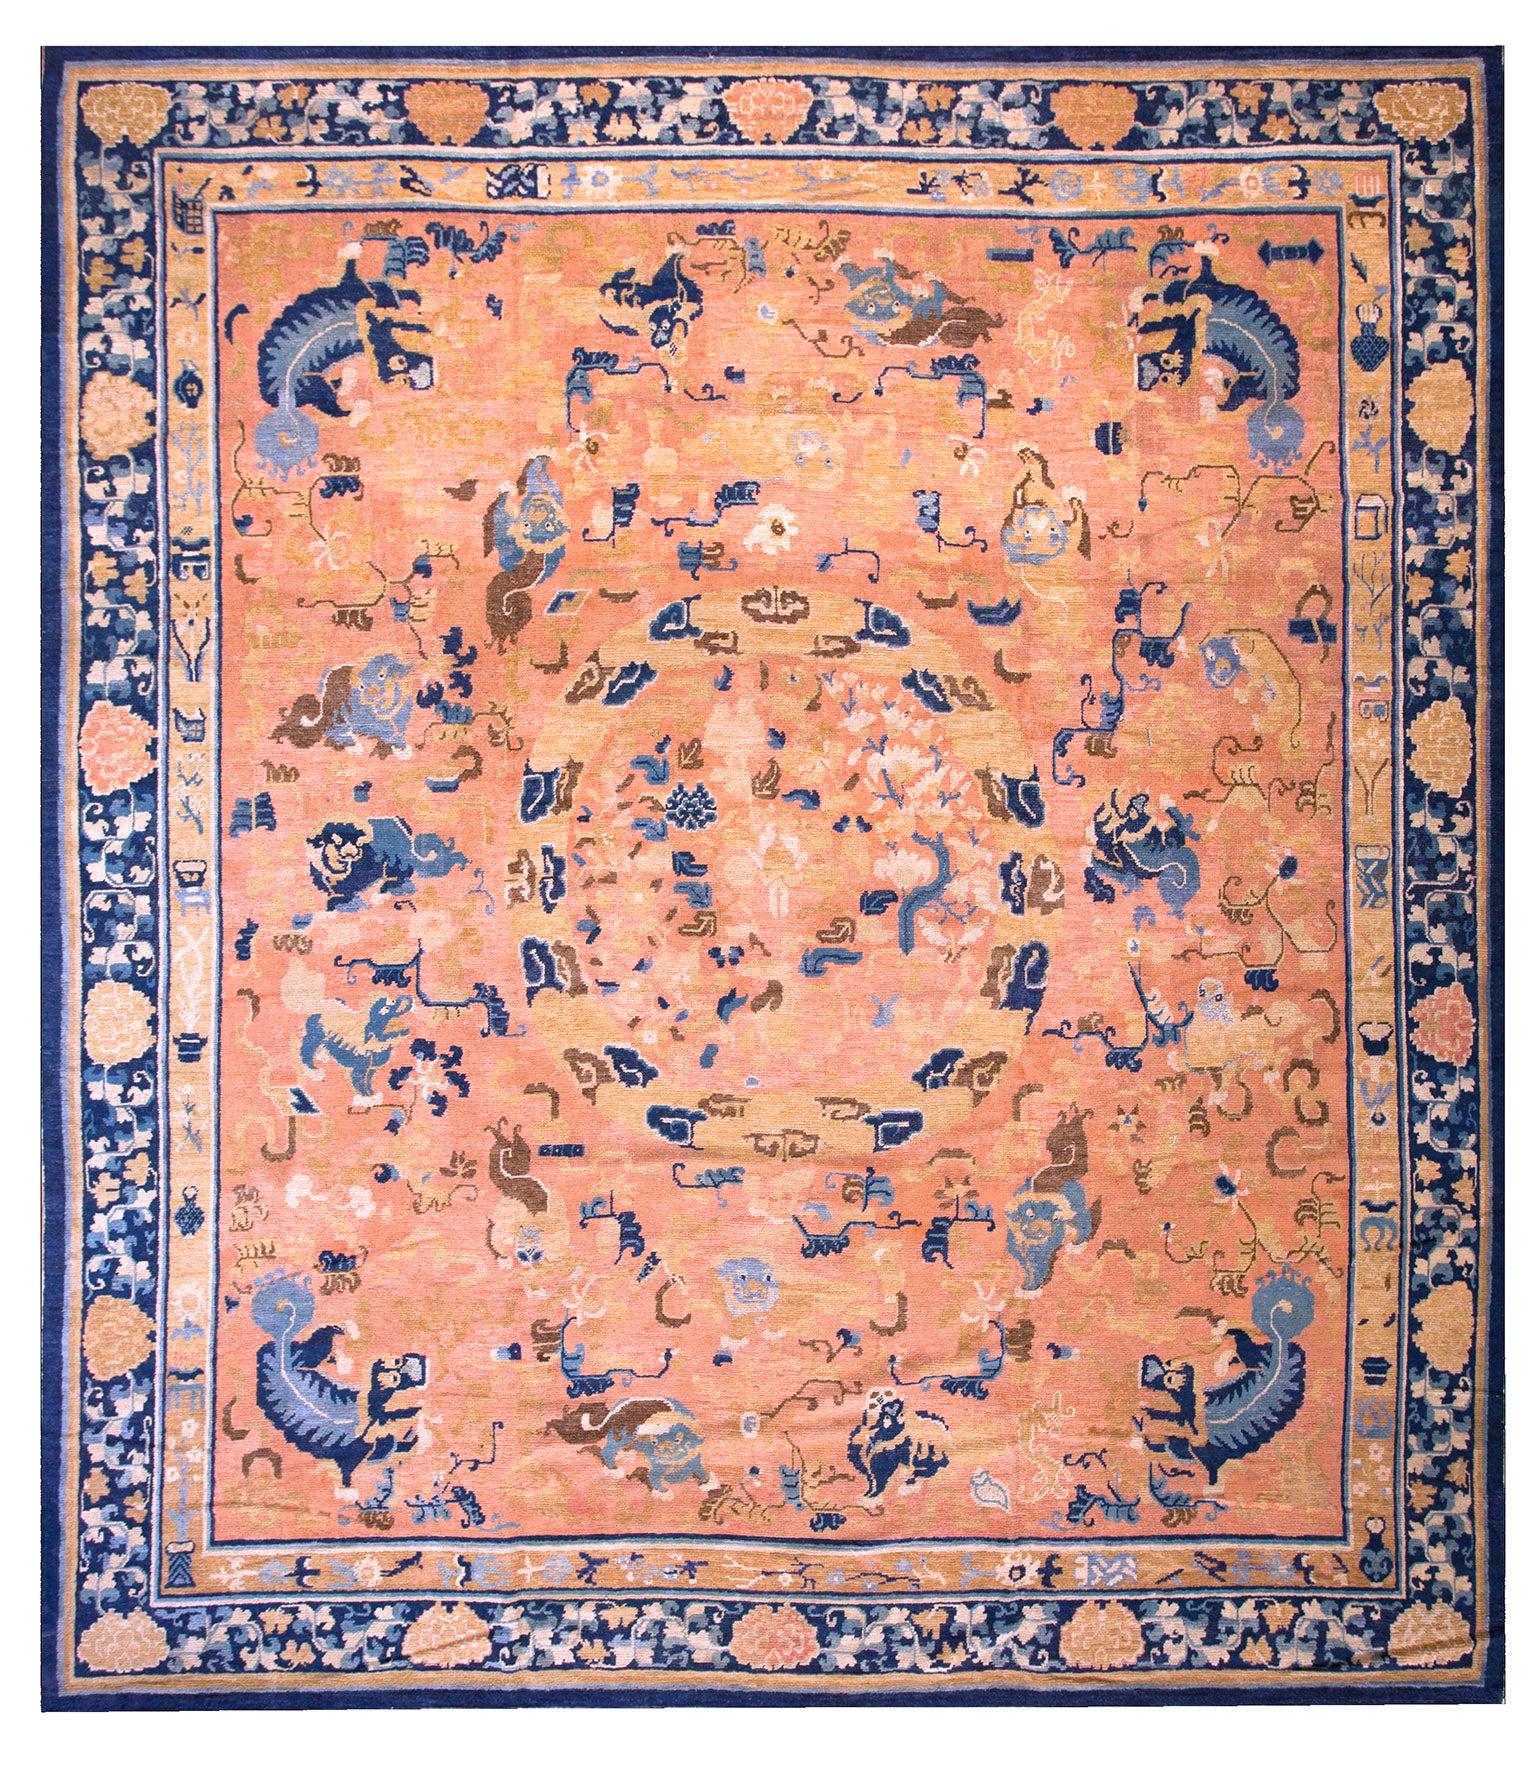 18th Century W. Chinese Ningxia Carpet ( 11'3" x 12'4" - 343 x 376 ) For Sale